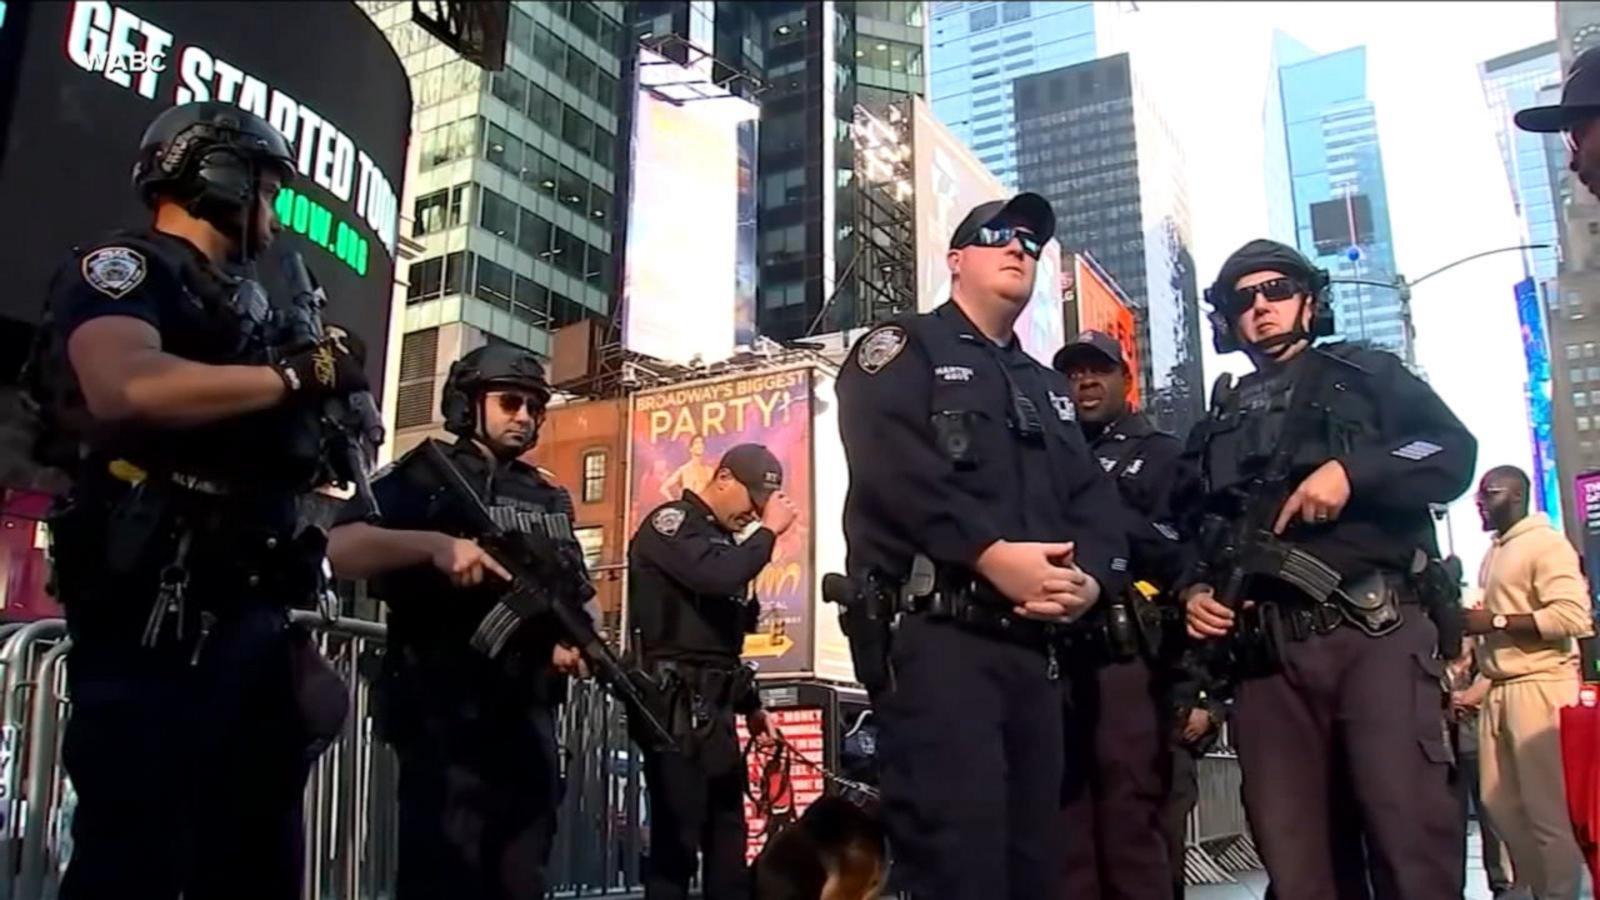 VIDEO: Police ramp up security precautions nationwide ahead of New Year's Eve